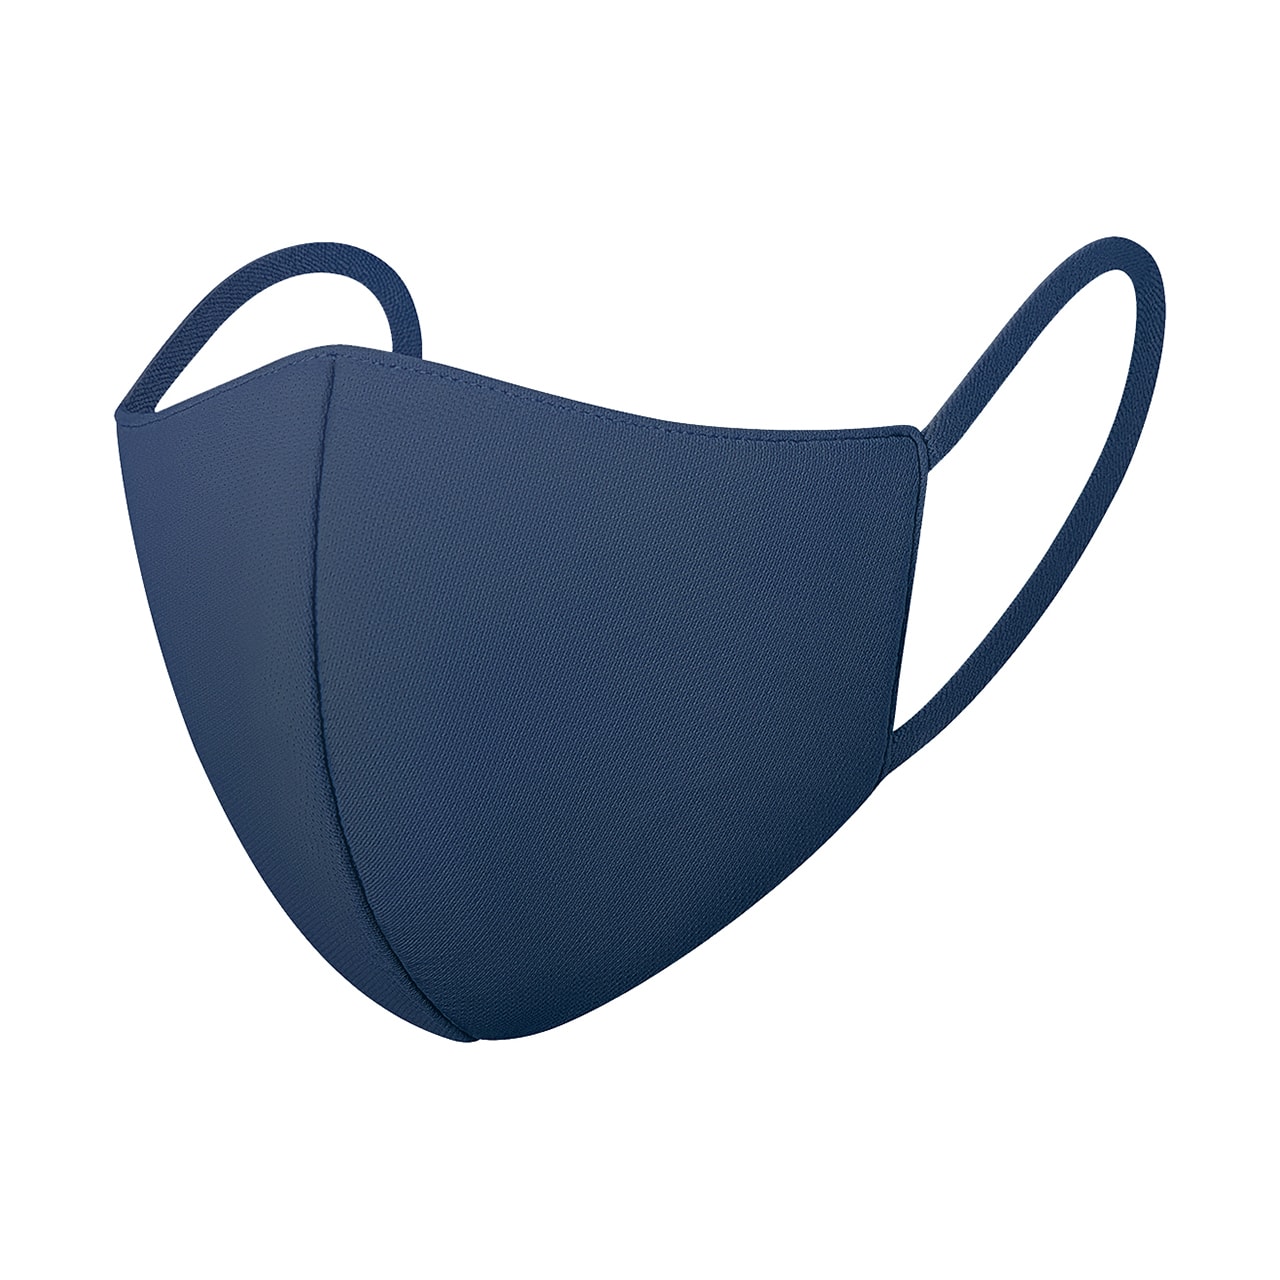 UNIQLO AIRism Face Masks in Navy, Blue and Brown